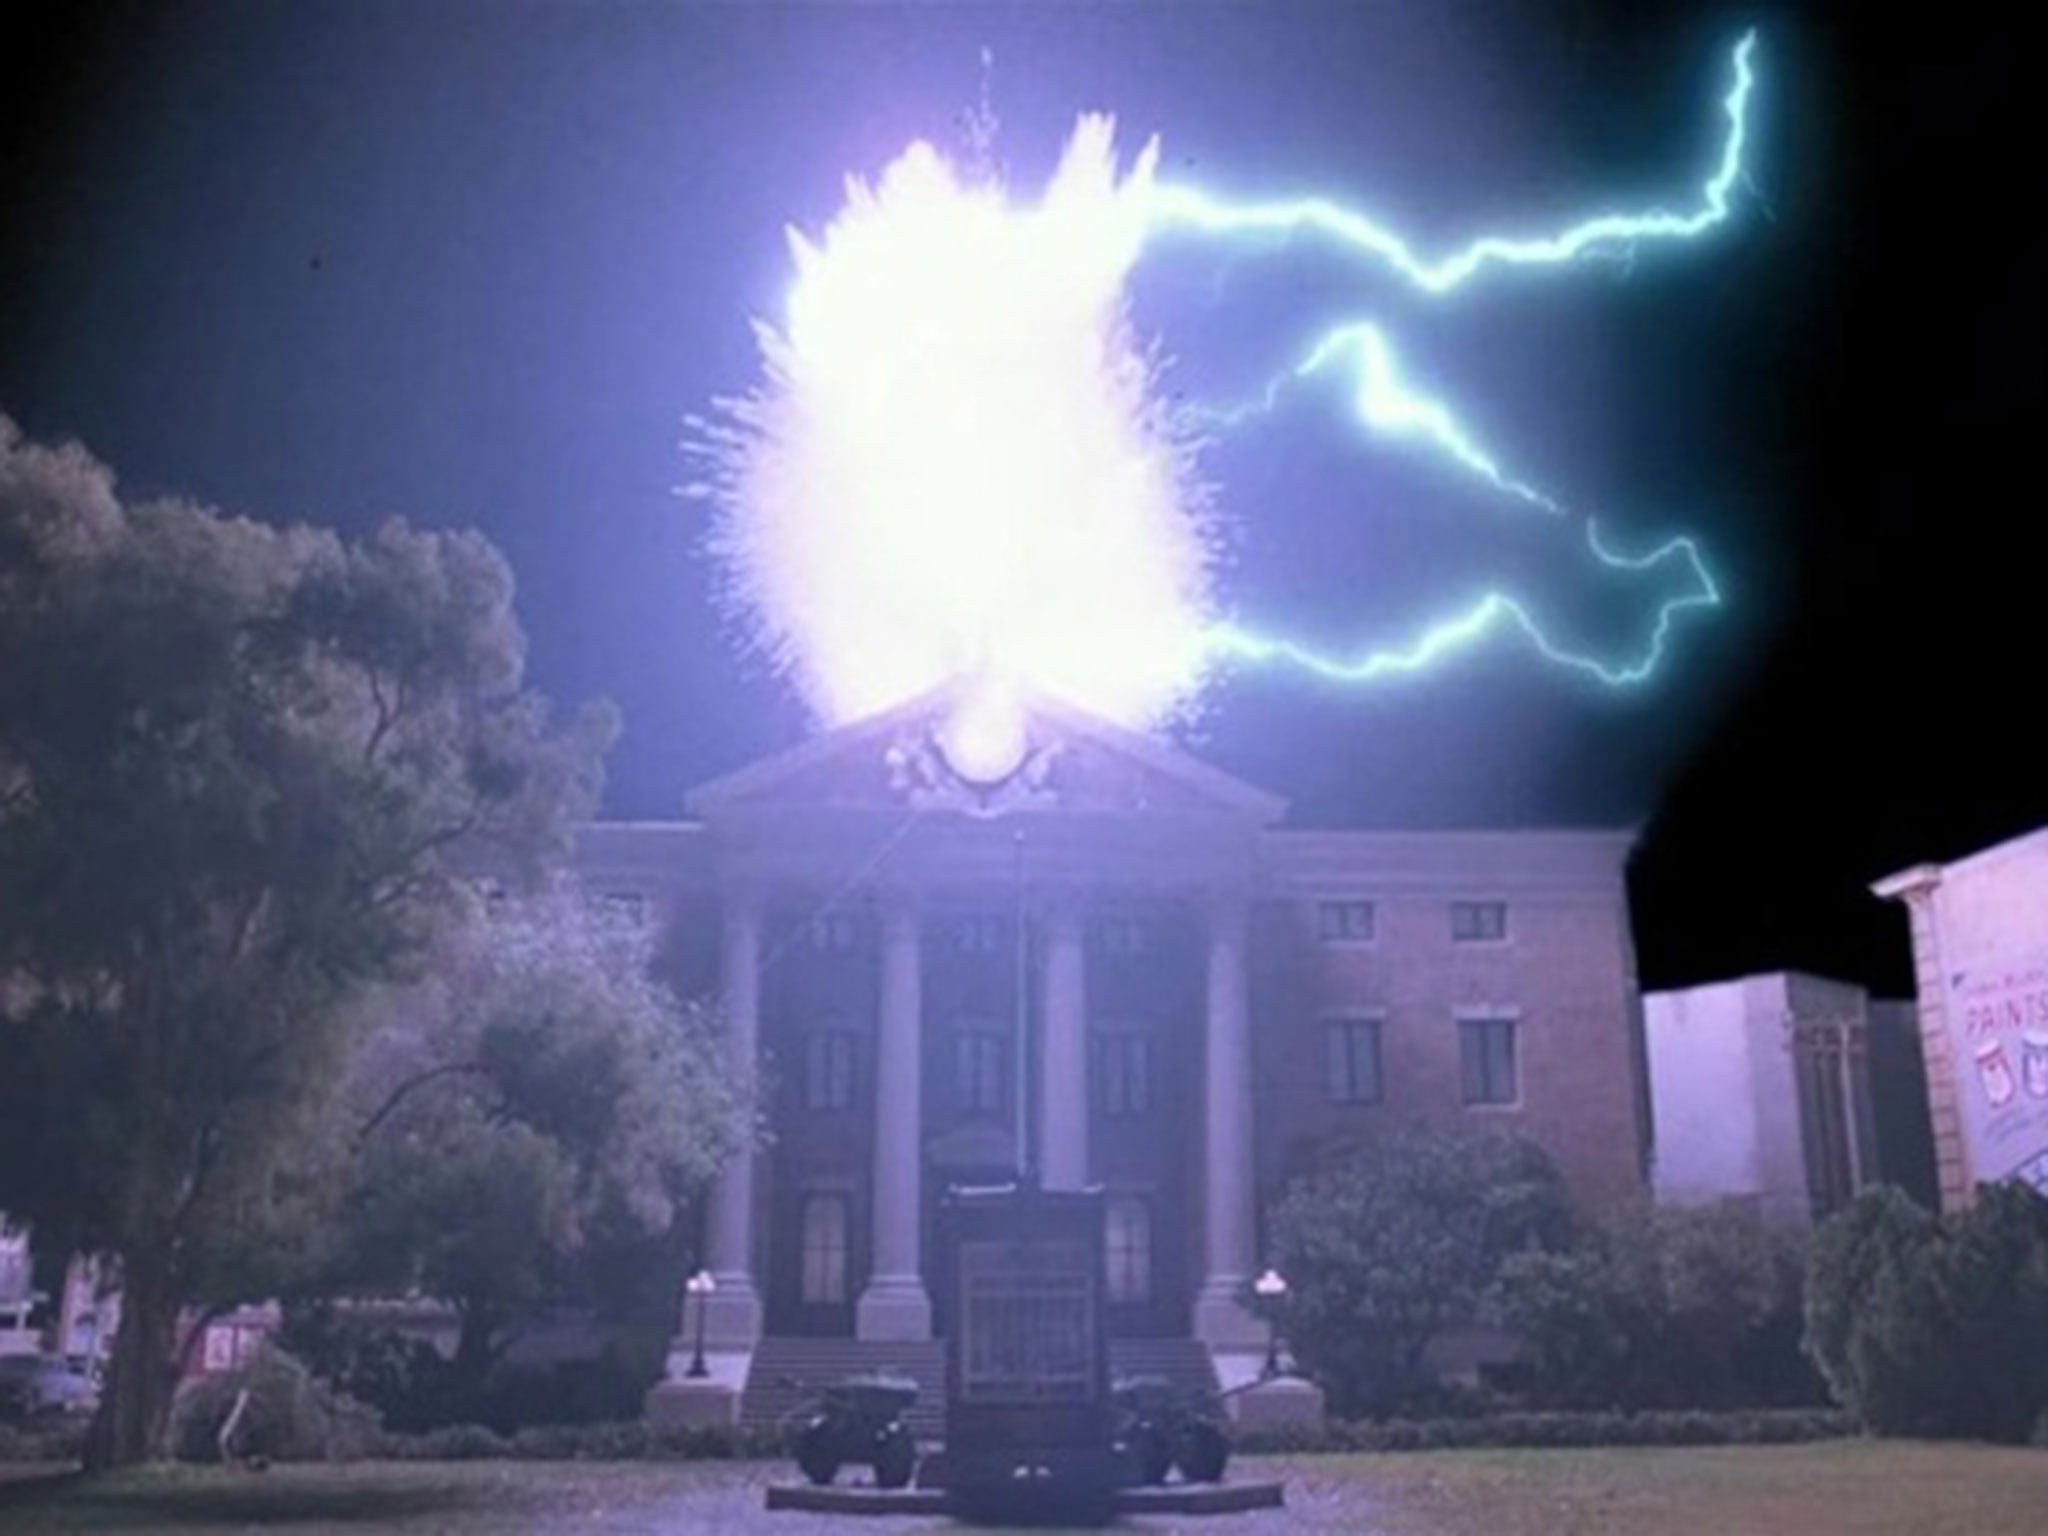 The title '10:04' refers to the moment when lighting strikes the clock tower in 'Back to the Future'